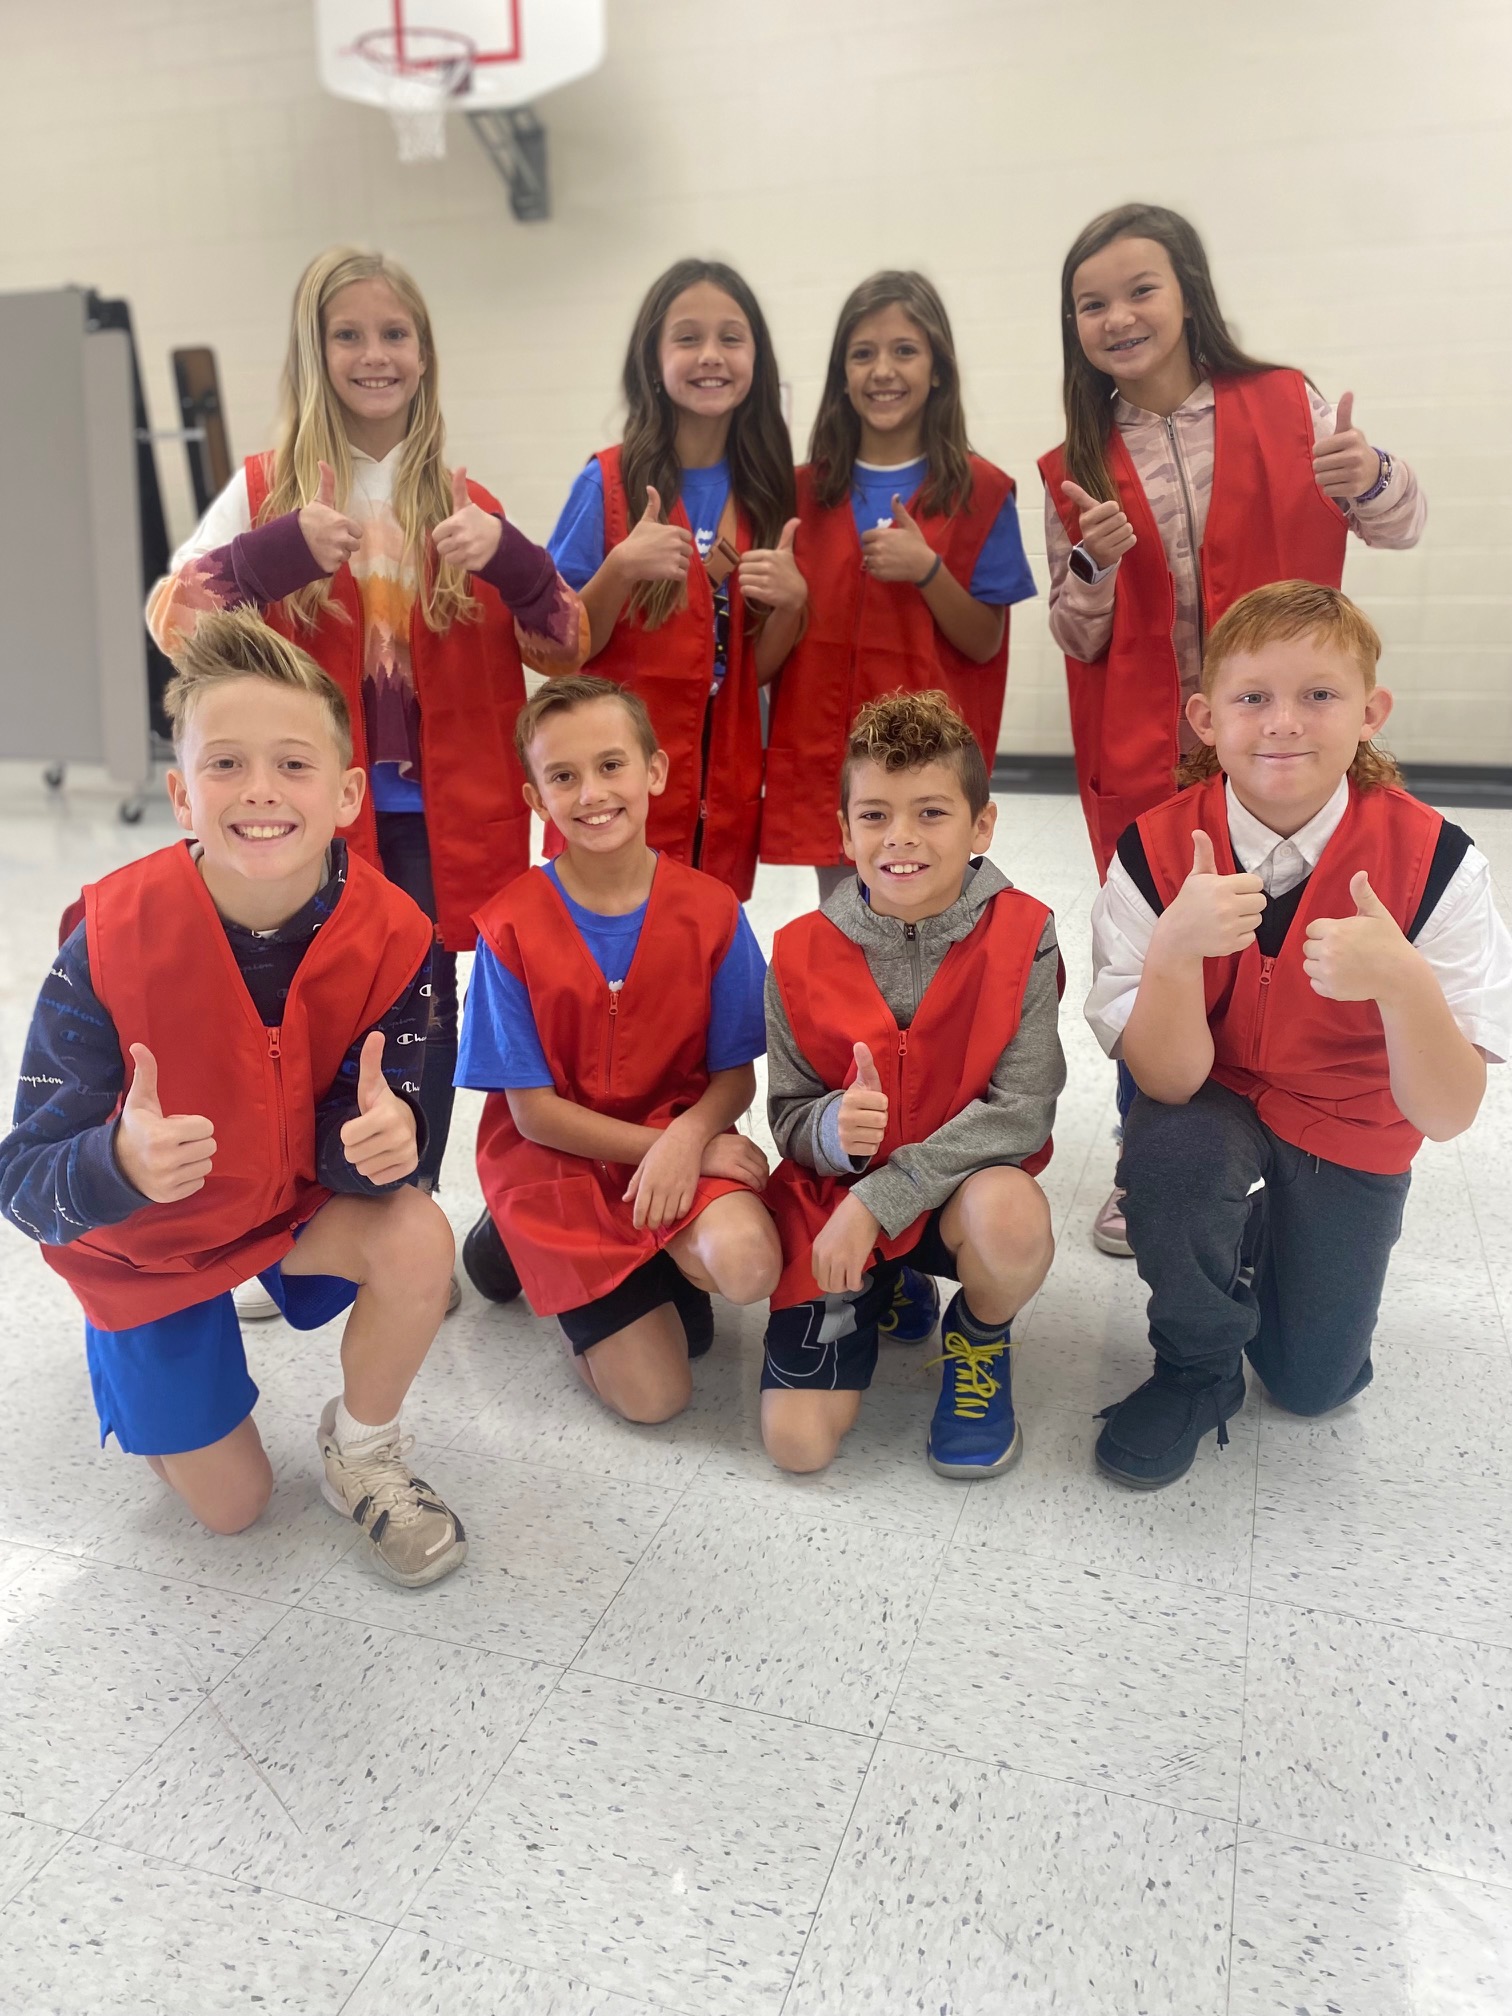 Student Council group in their red vests. 